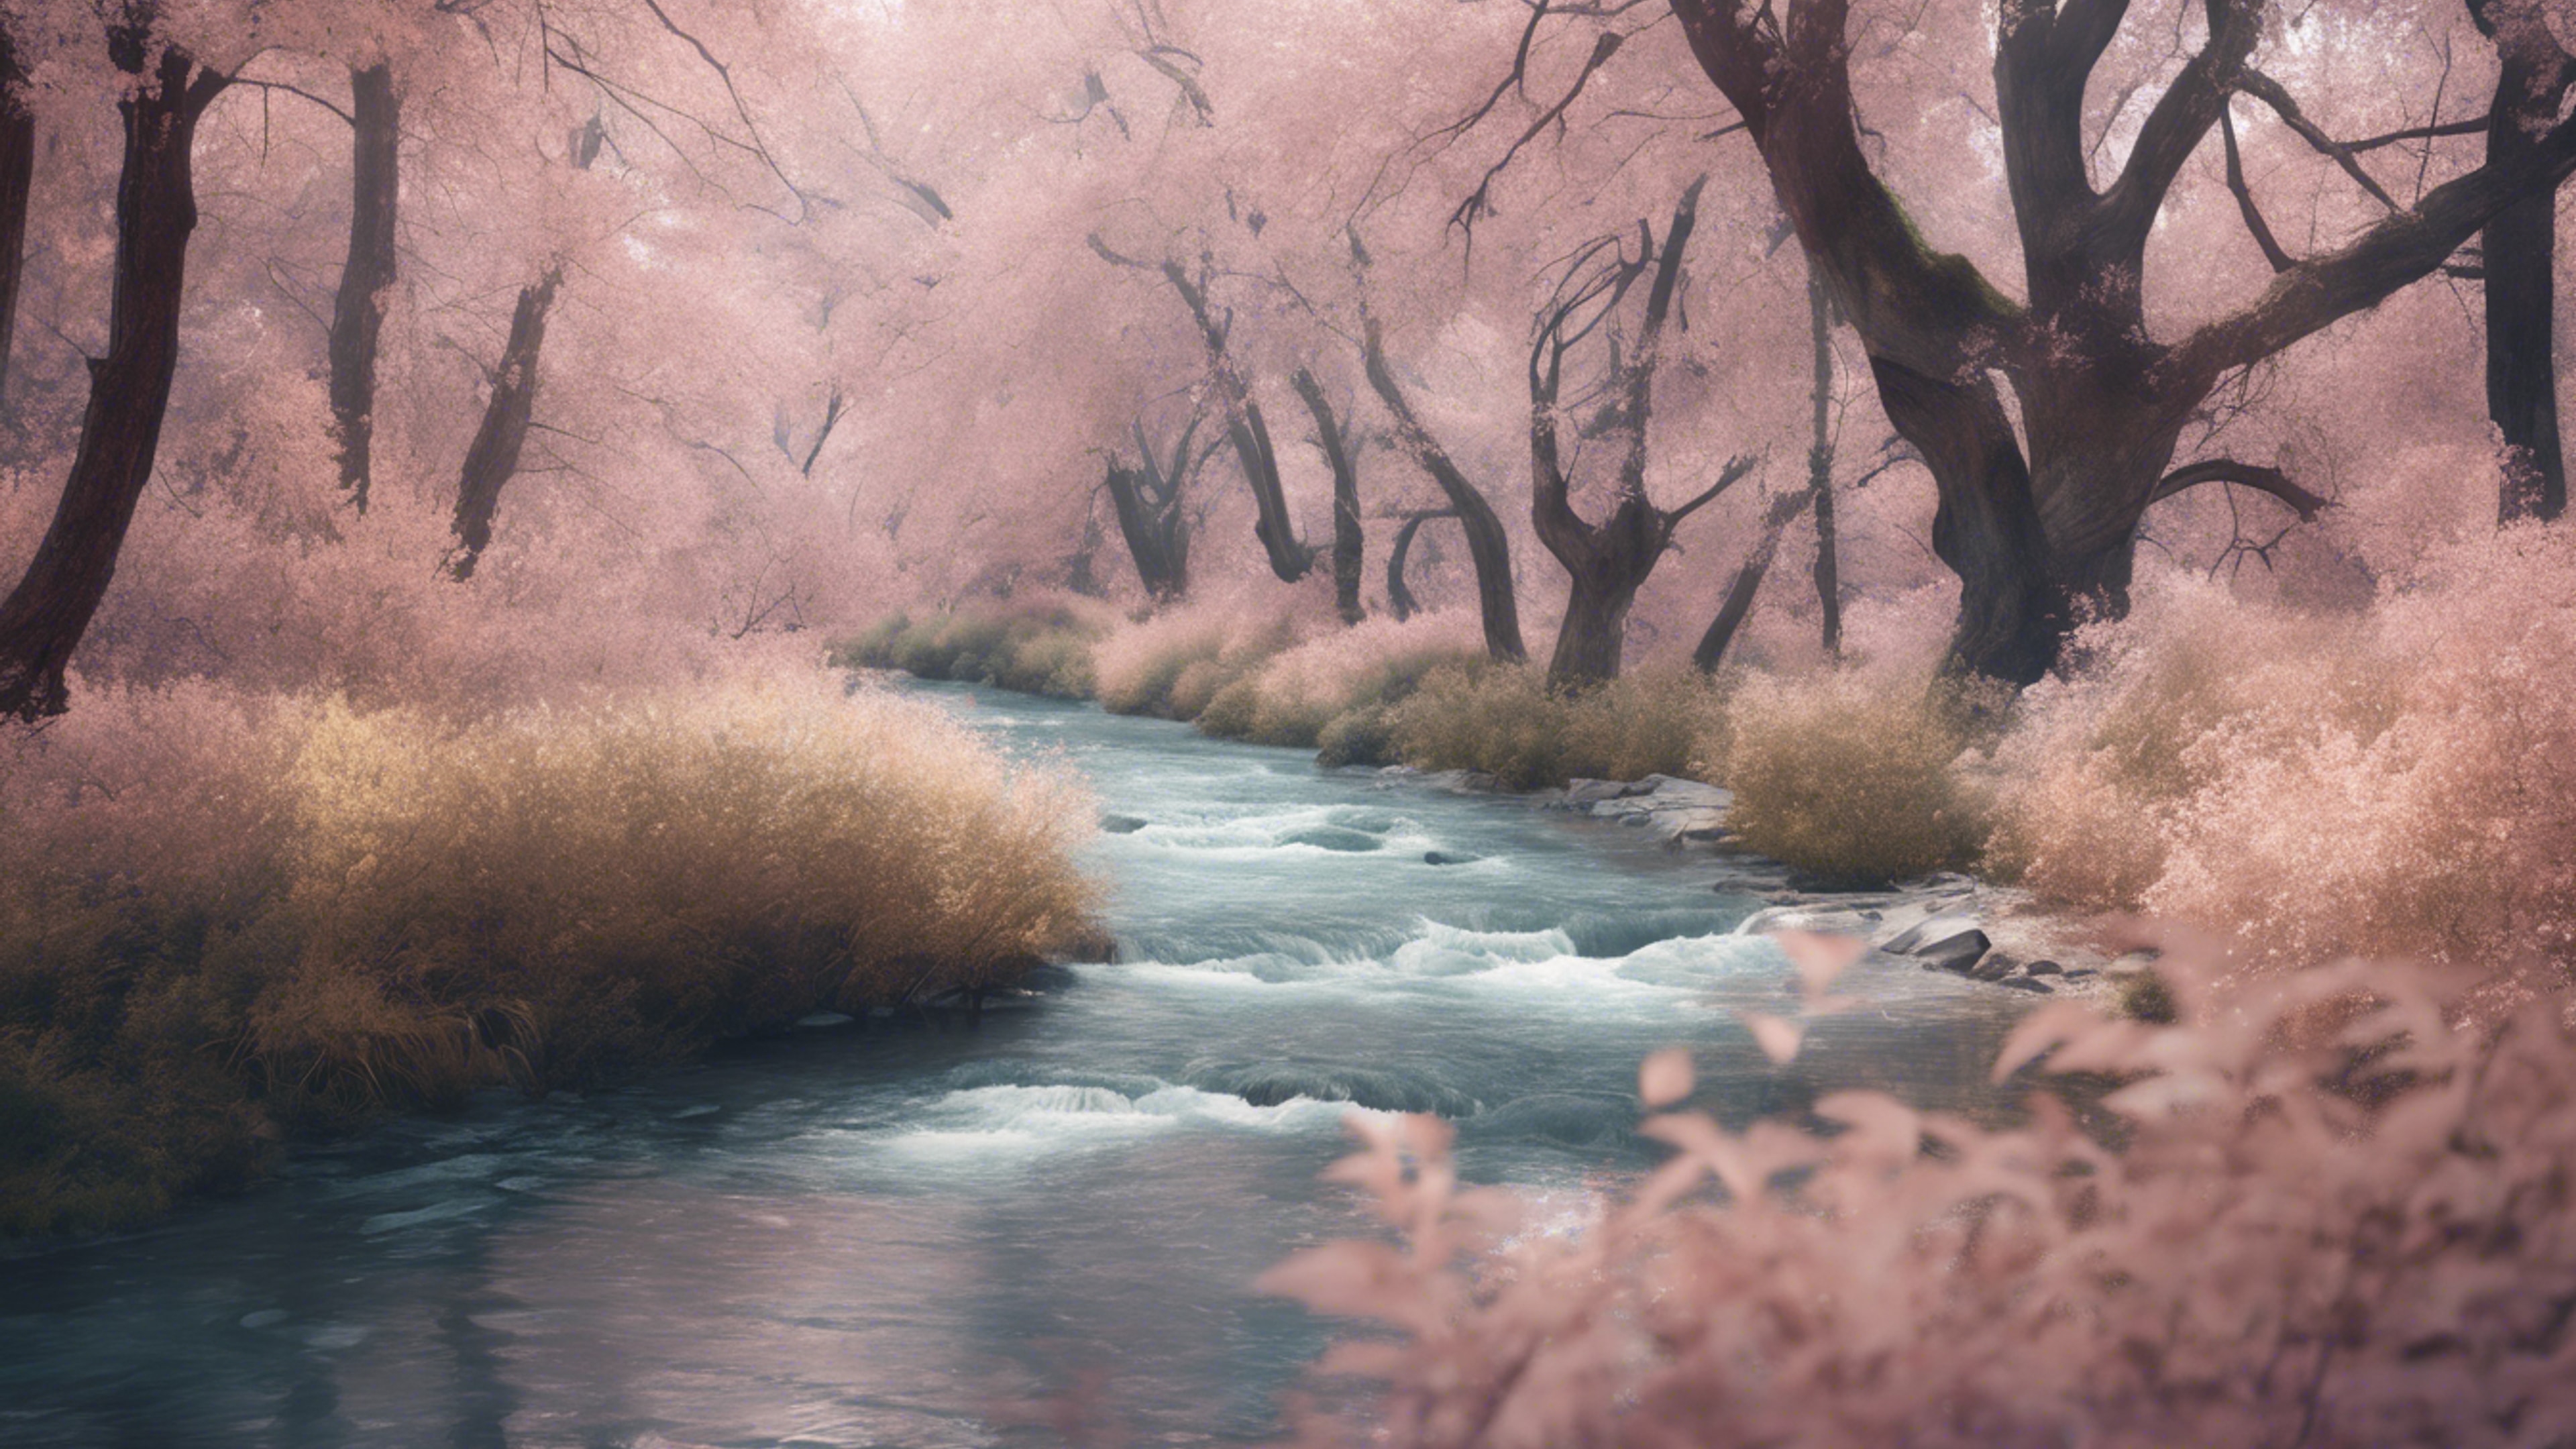 An illustration of a murmuring creek, surrounded by trees bearing cool pastel leaves. Обои[1b082a297a56458ebf1b]